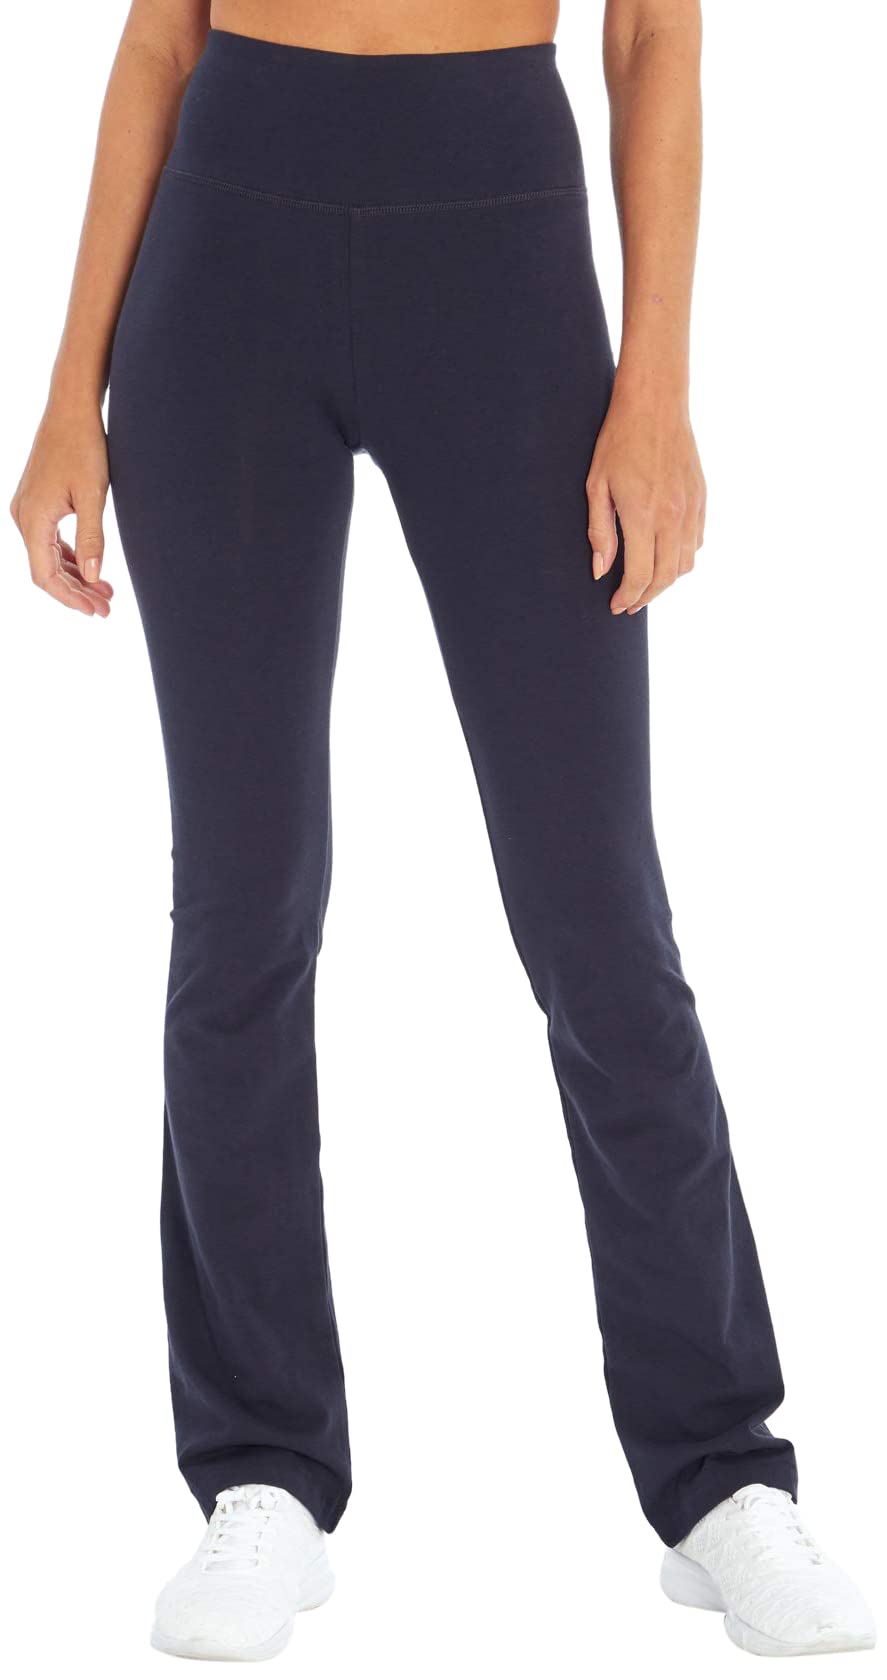 Bally Total Fitness Women’s The Legacy Tummy Control Pant